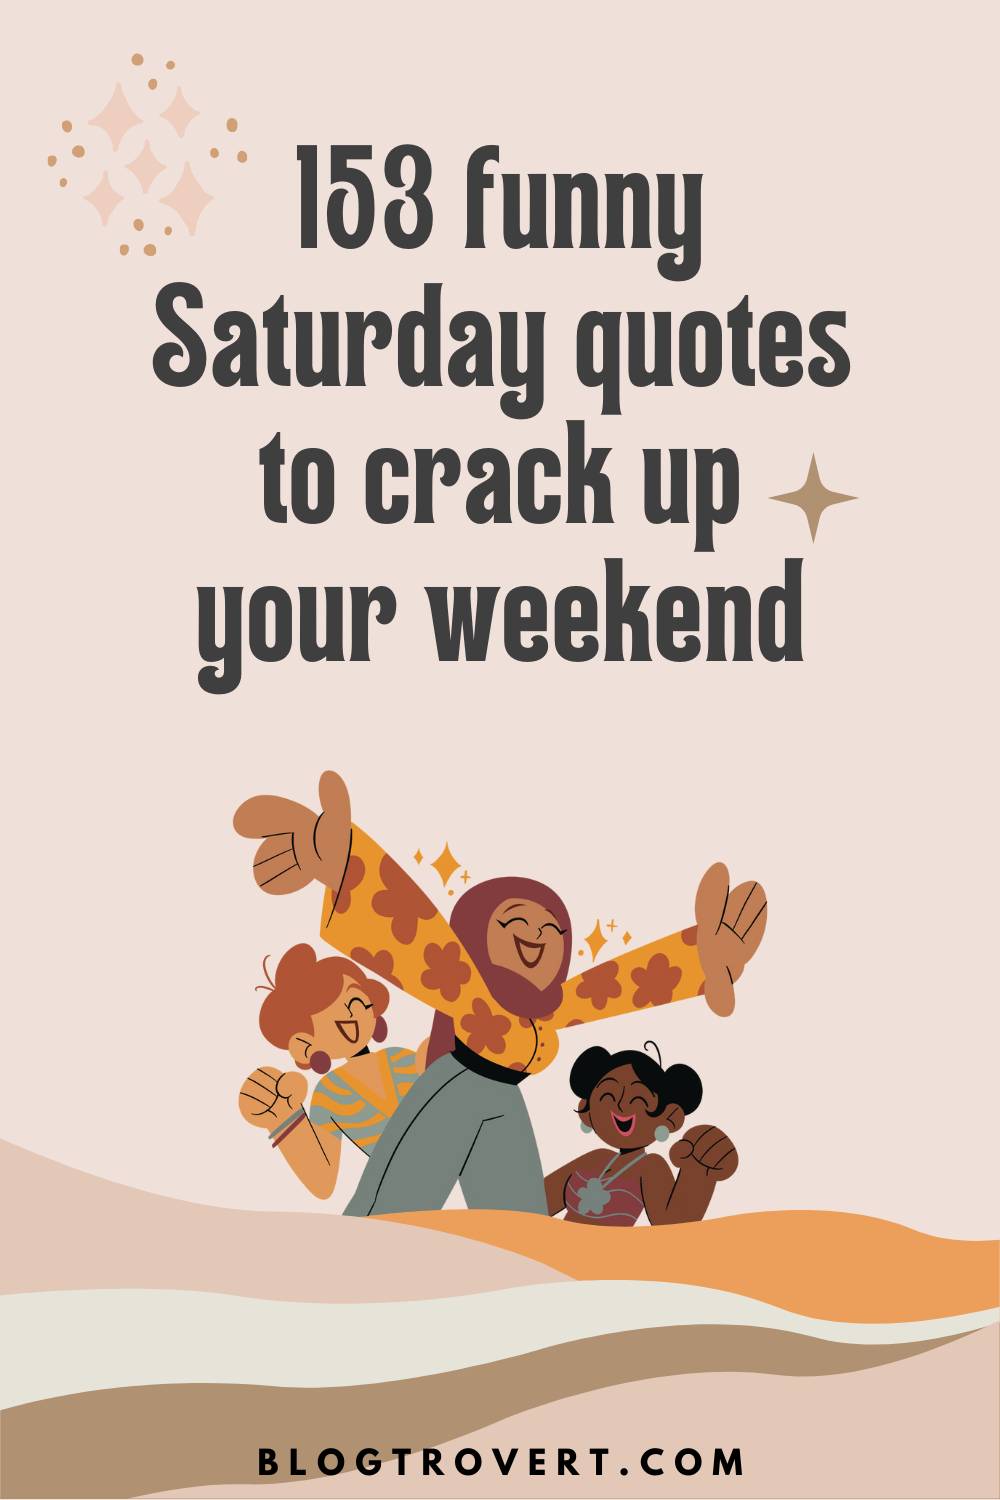 153 funny Saturday quotes to crack up your weekend 4